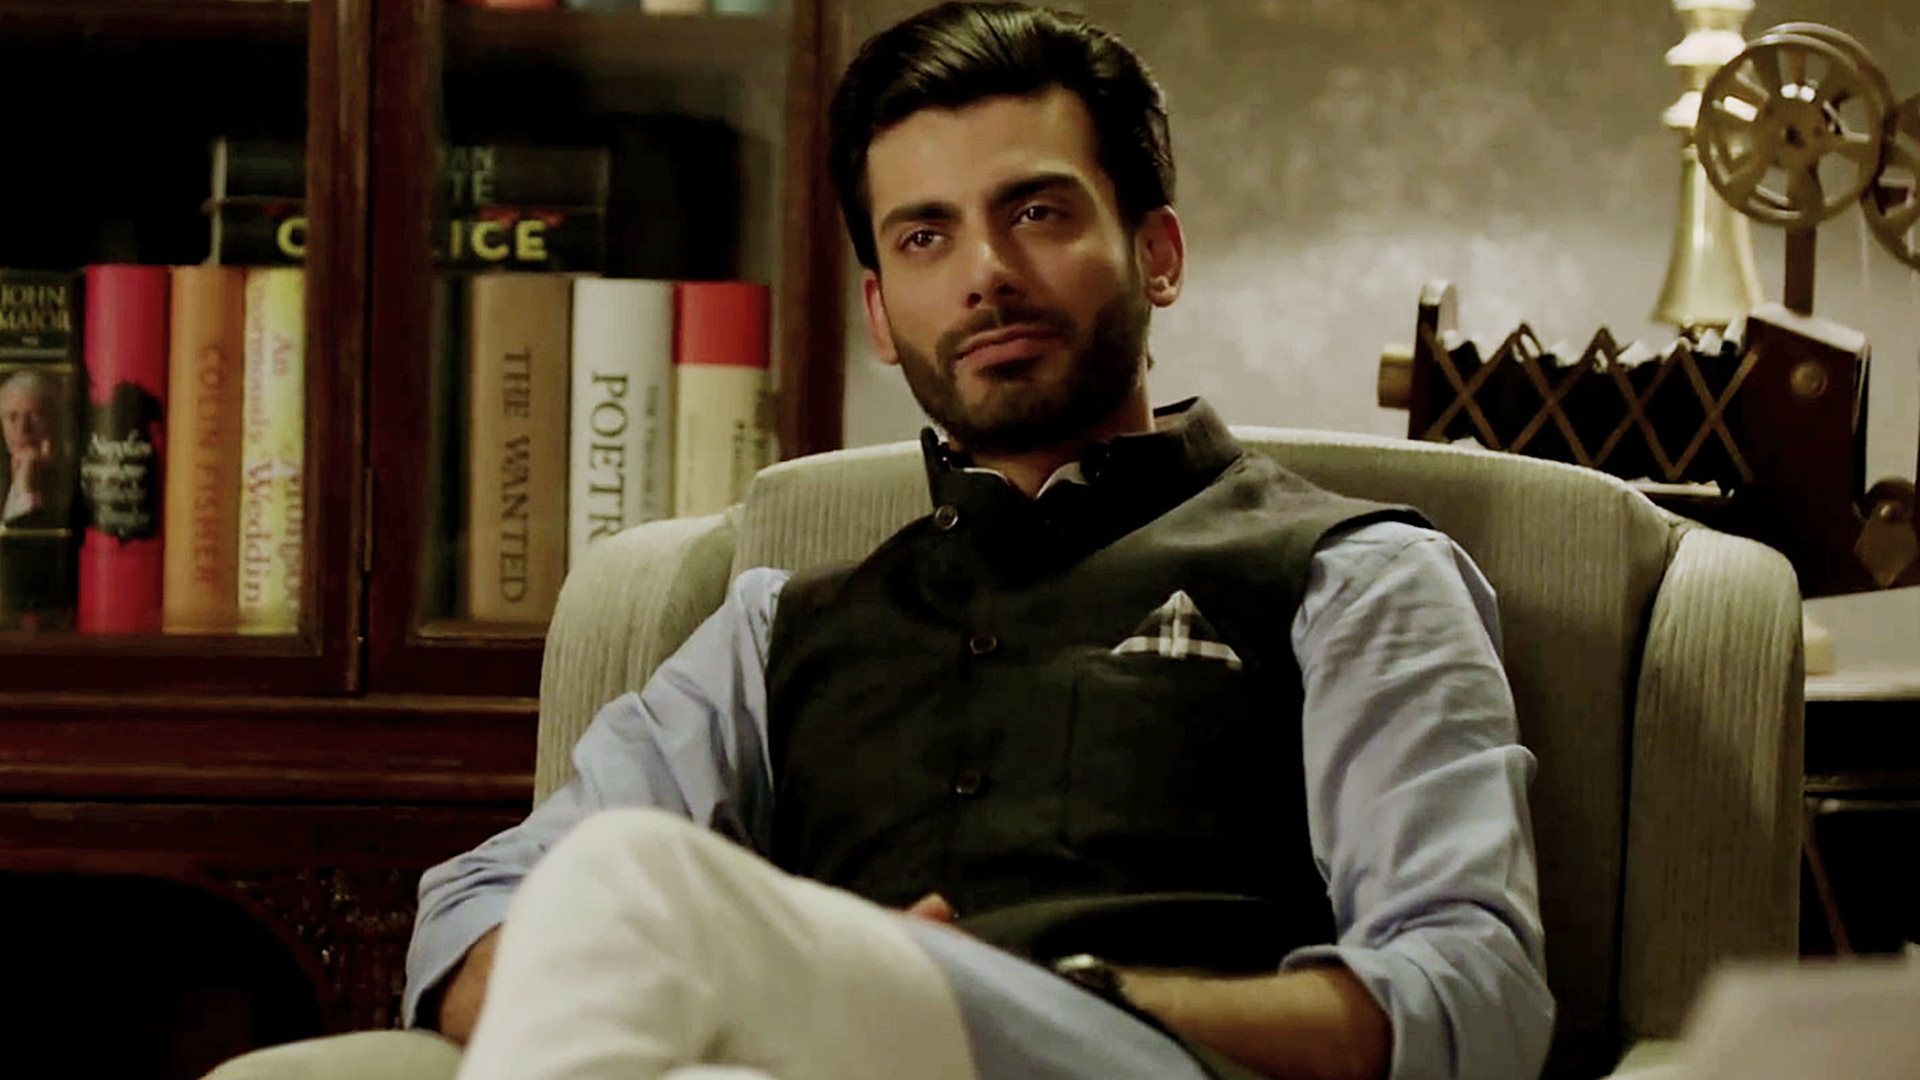 Fawad Khan booked for refusing Polio vaccination for daughter, actor refutes allegation